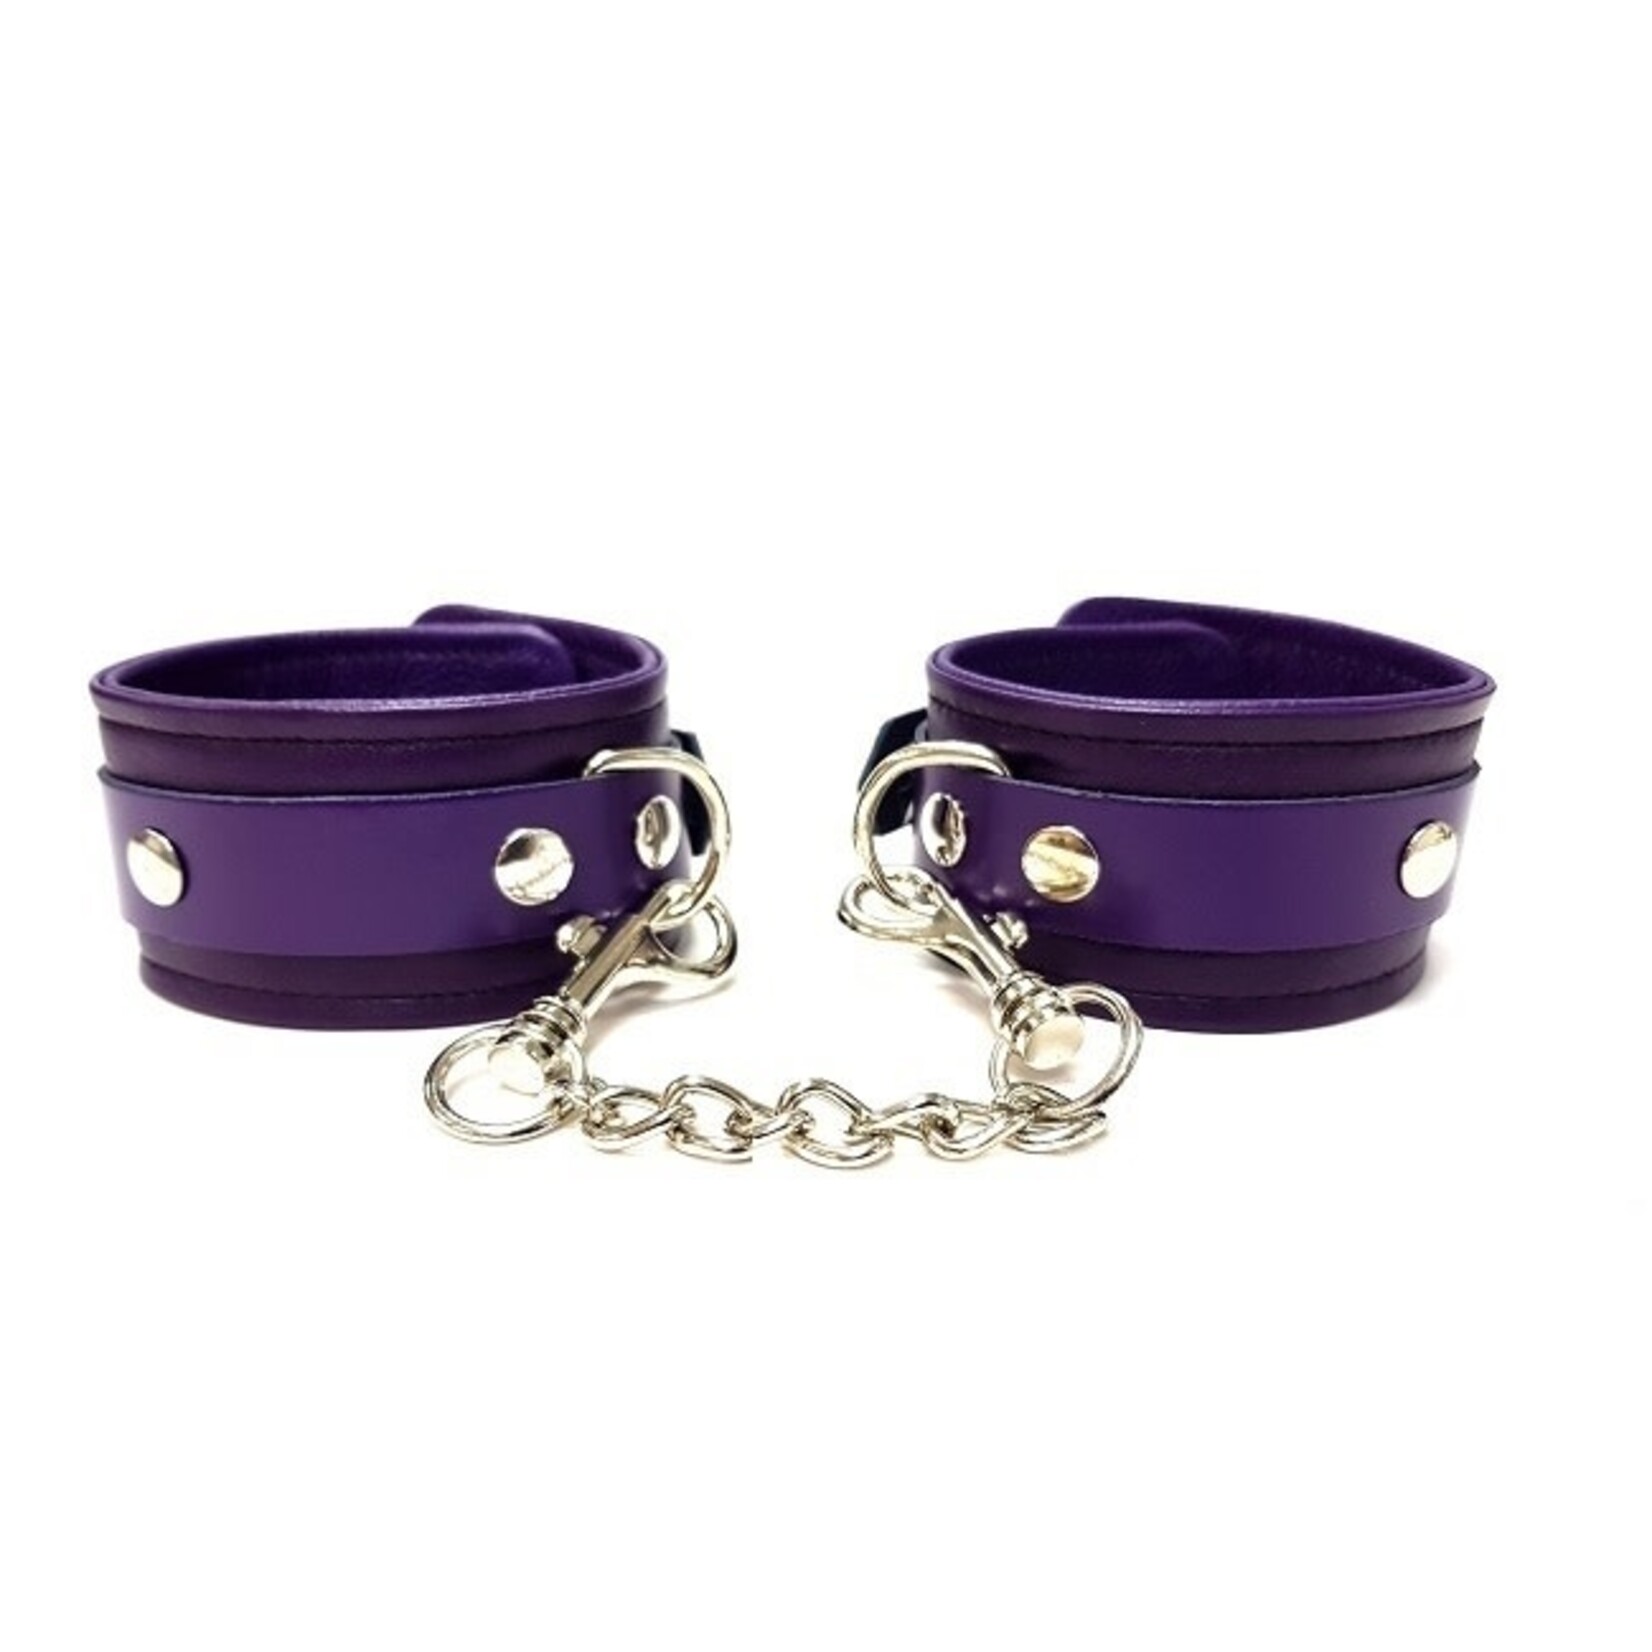 Rouge Rouge Leather Ankle Cuffs